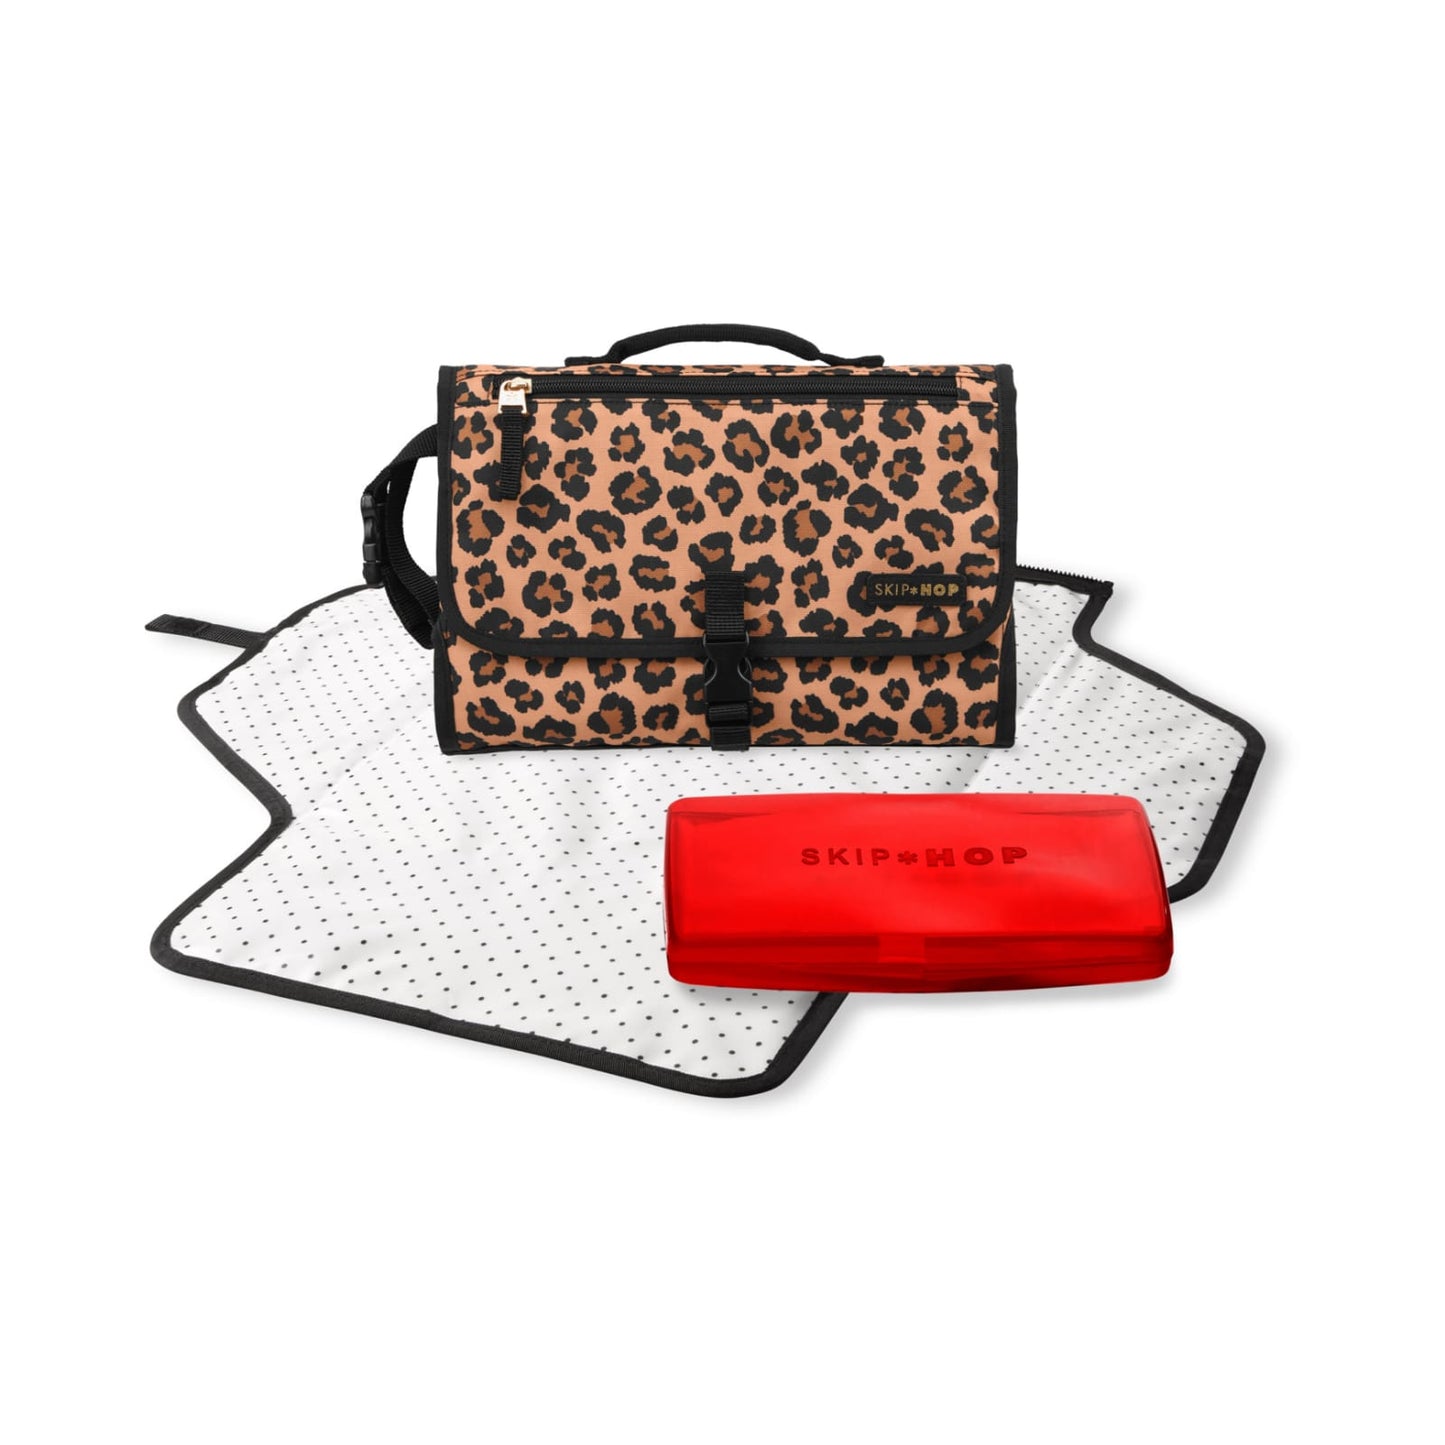 Pronto Changing Station - Classic Leopard